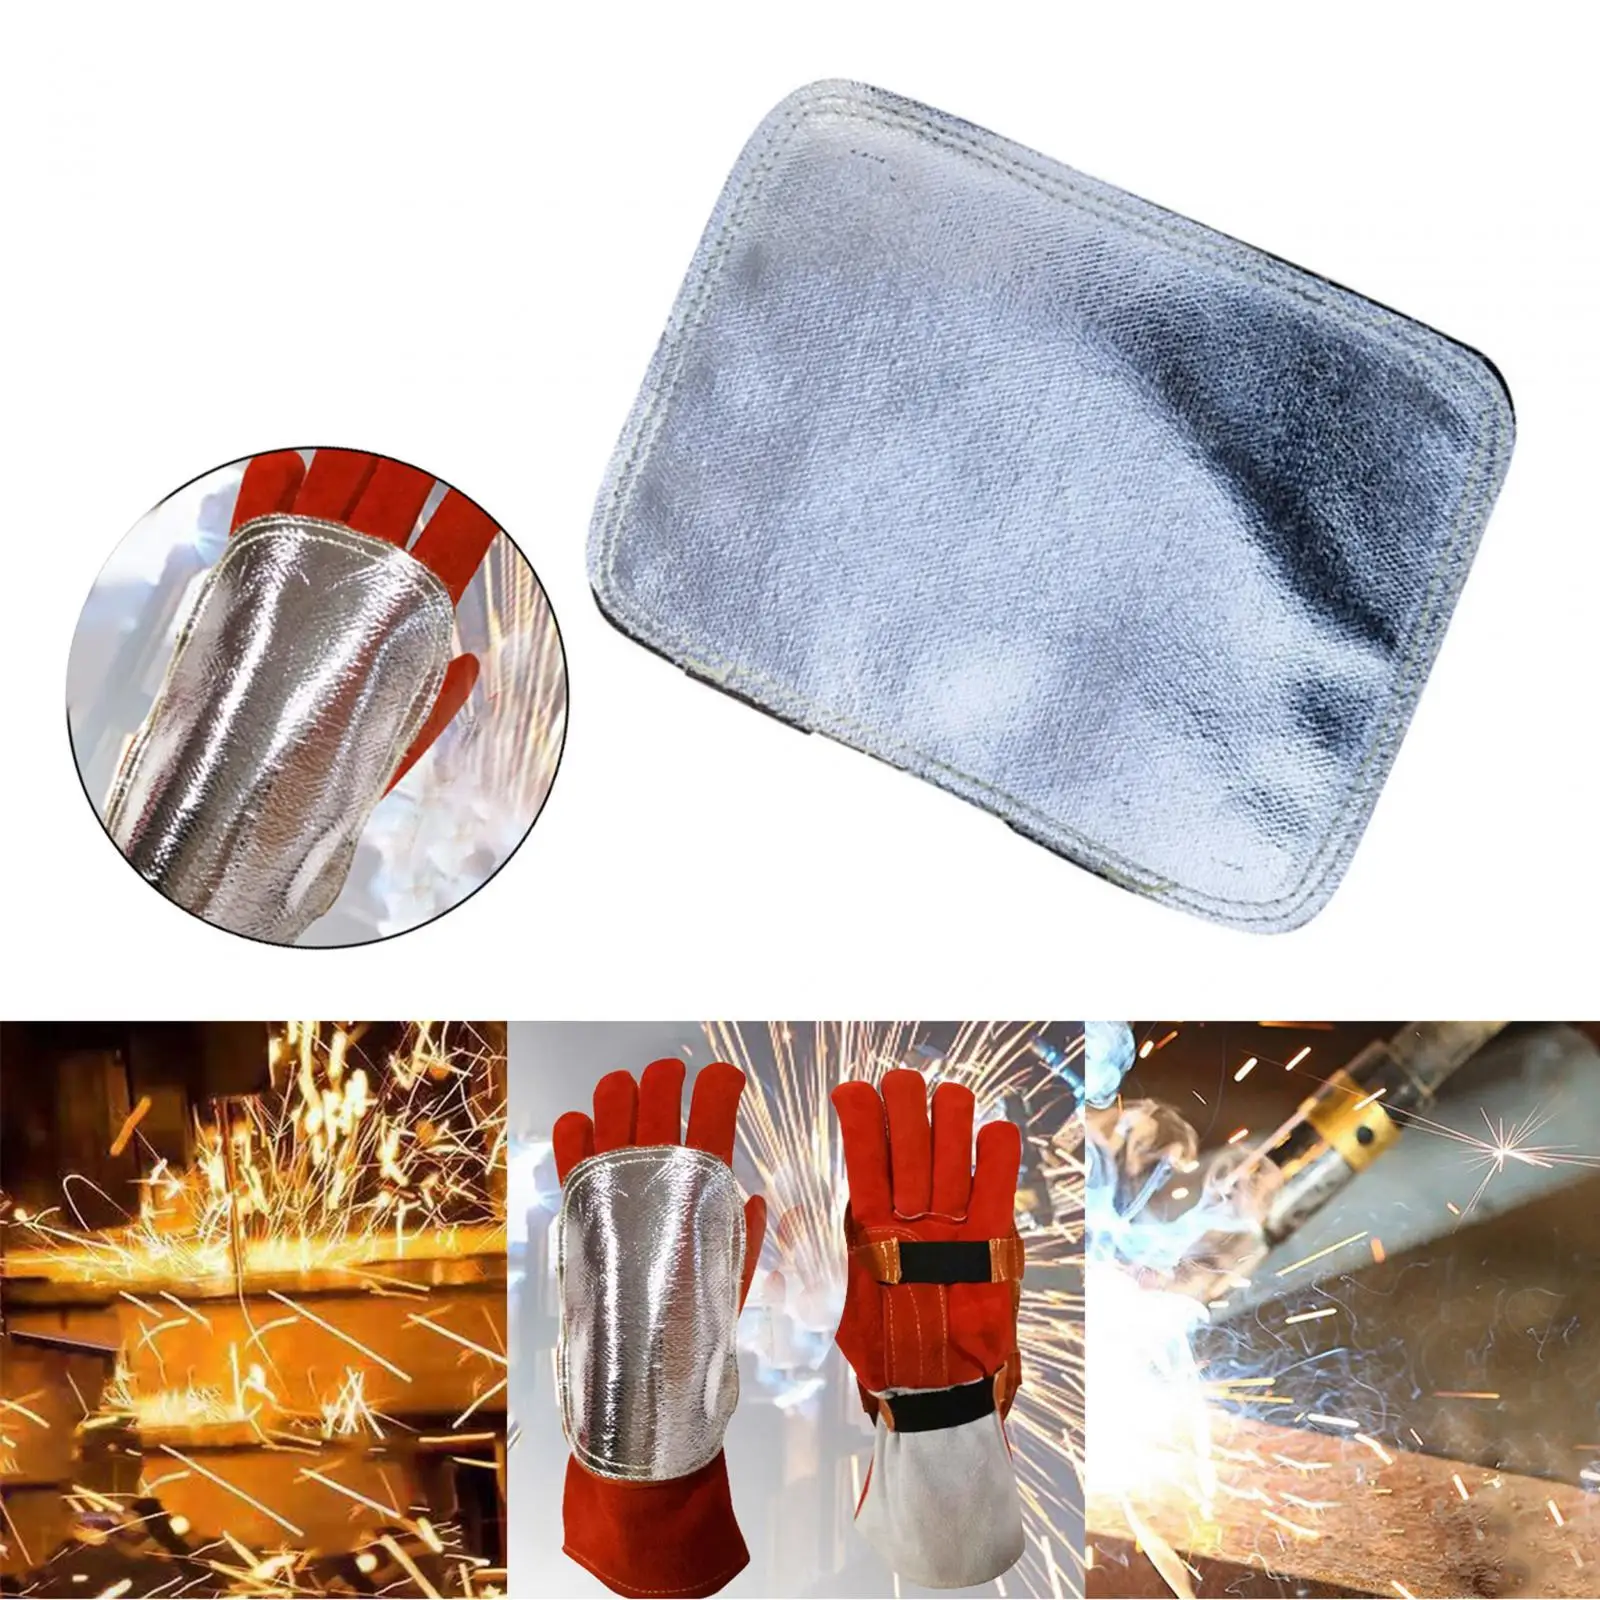 Welding Hands Welding Hand Pad PU Leather Heat Fireproof Gloves Pad for Industrial Boiler Camping Metal Smelting Cutting Welding